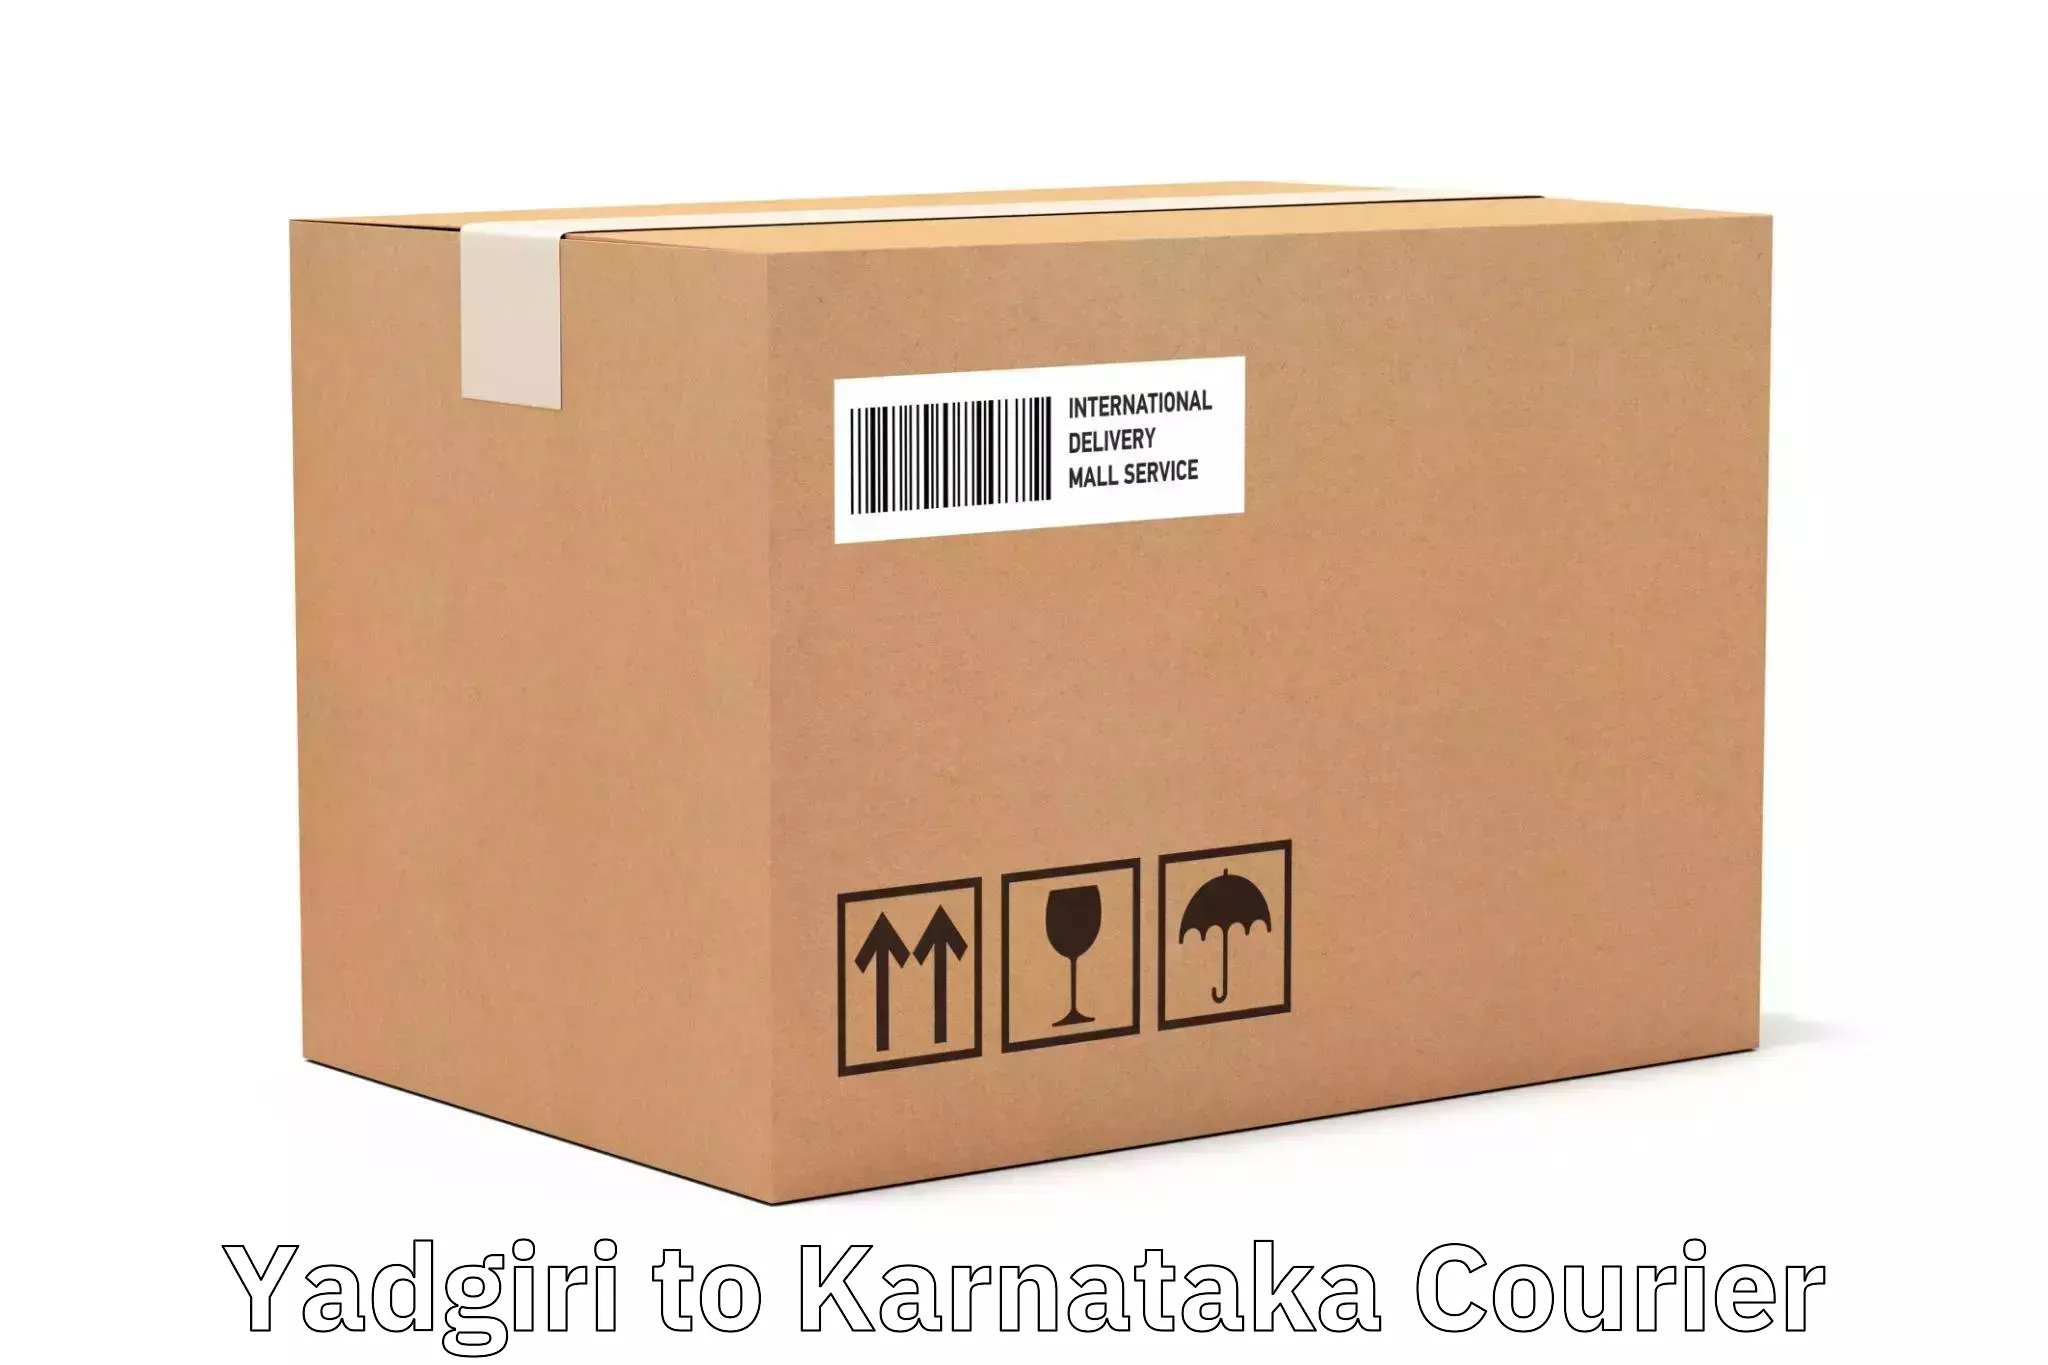 Easy access courier services Yadgiri to Yellare